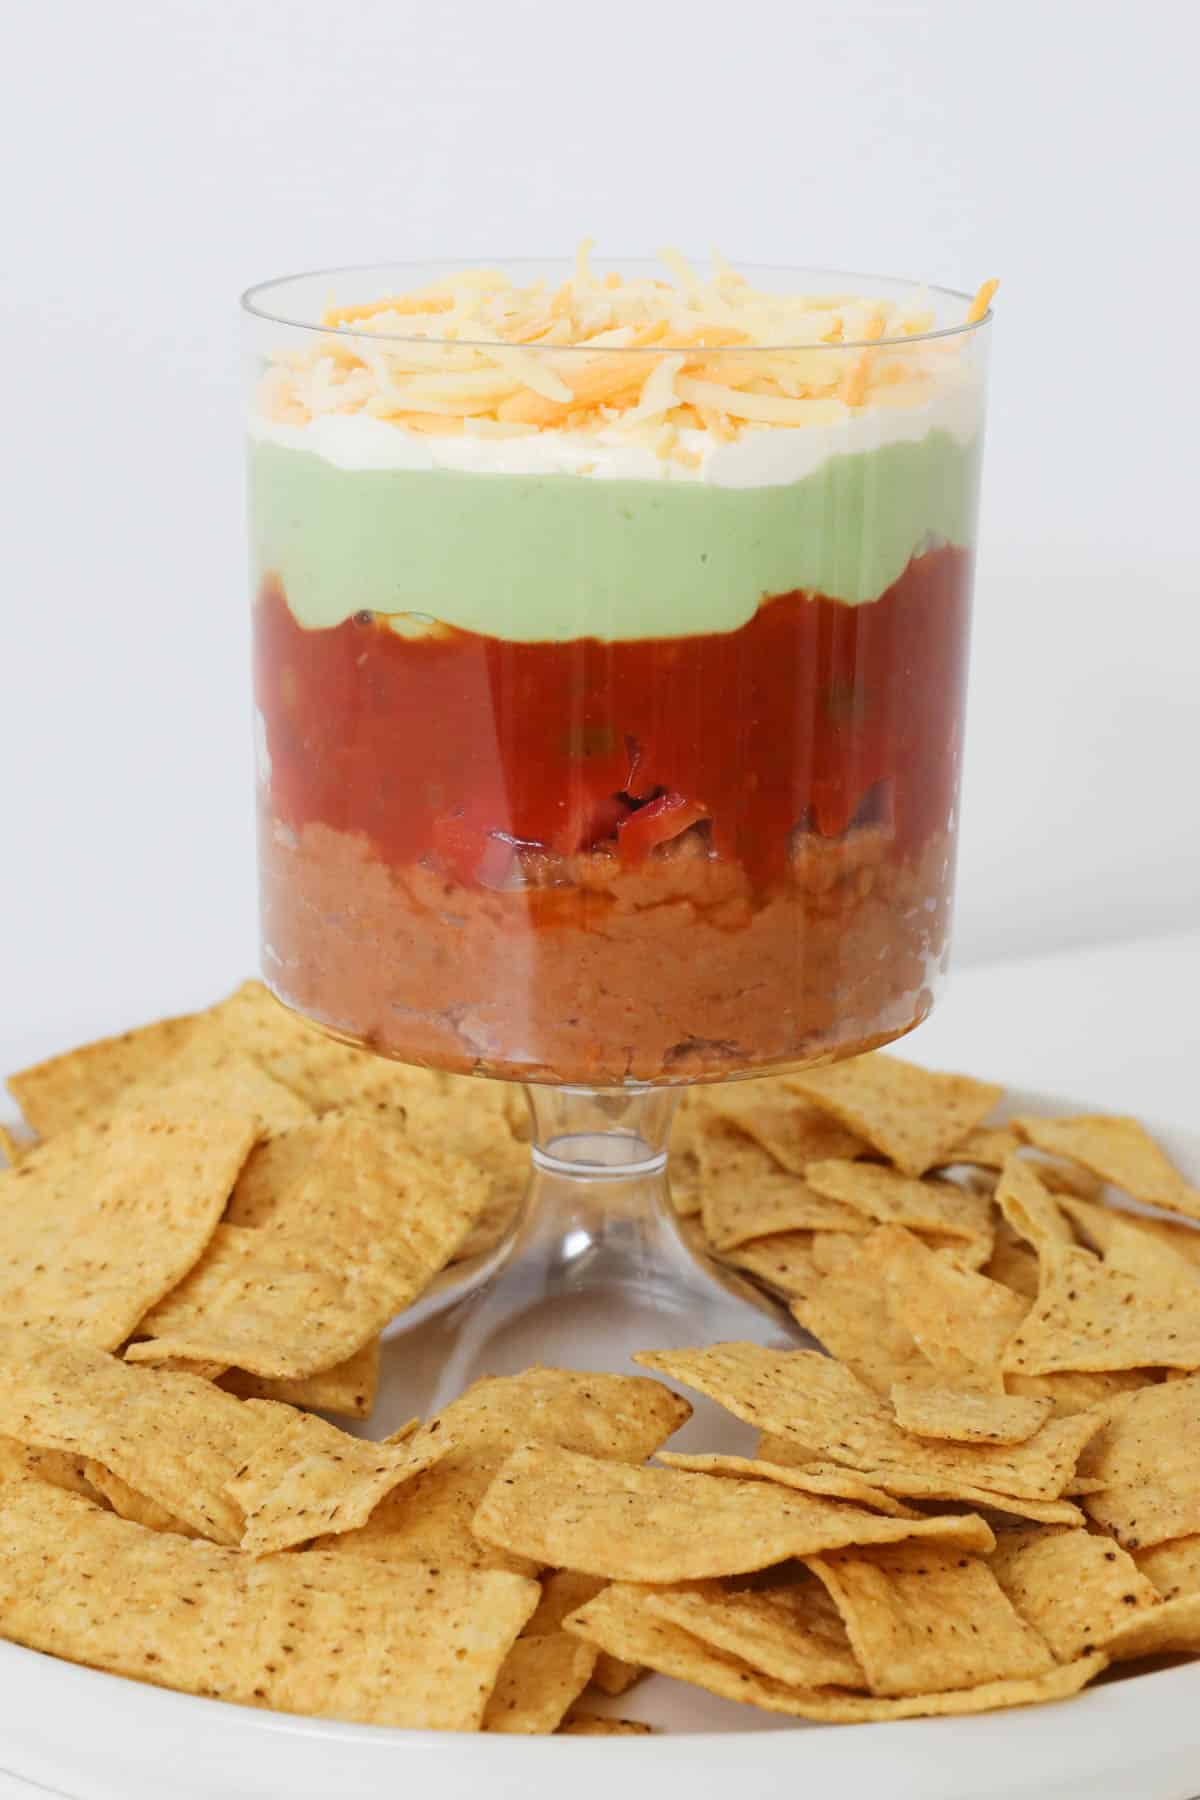 A tall bowl holding a colouful Mexican layer dip surrounded by tortilla strips.